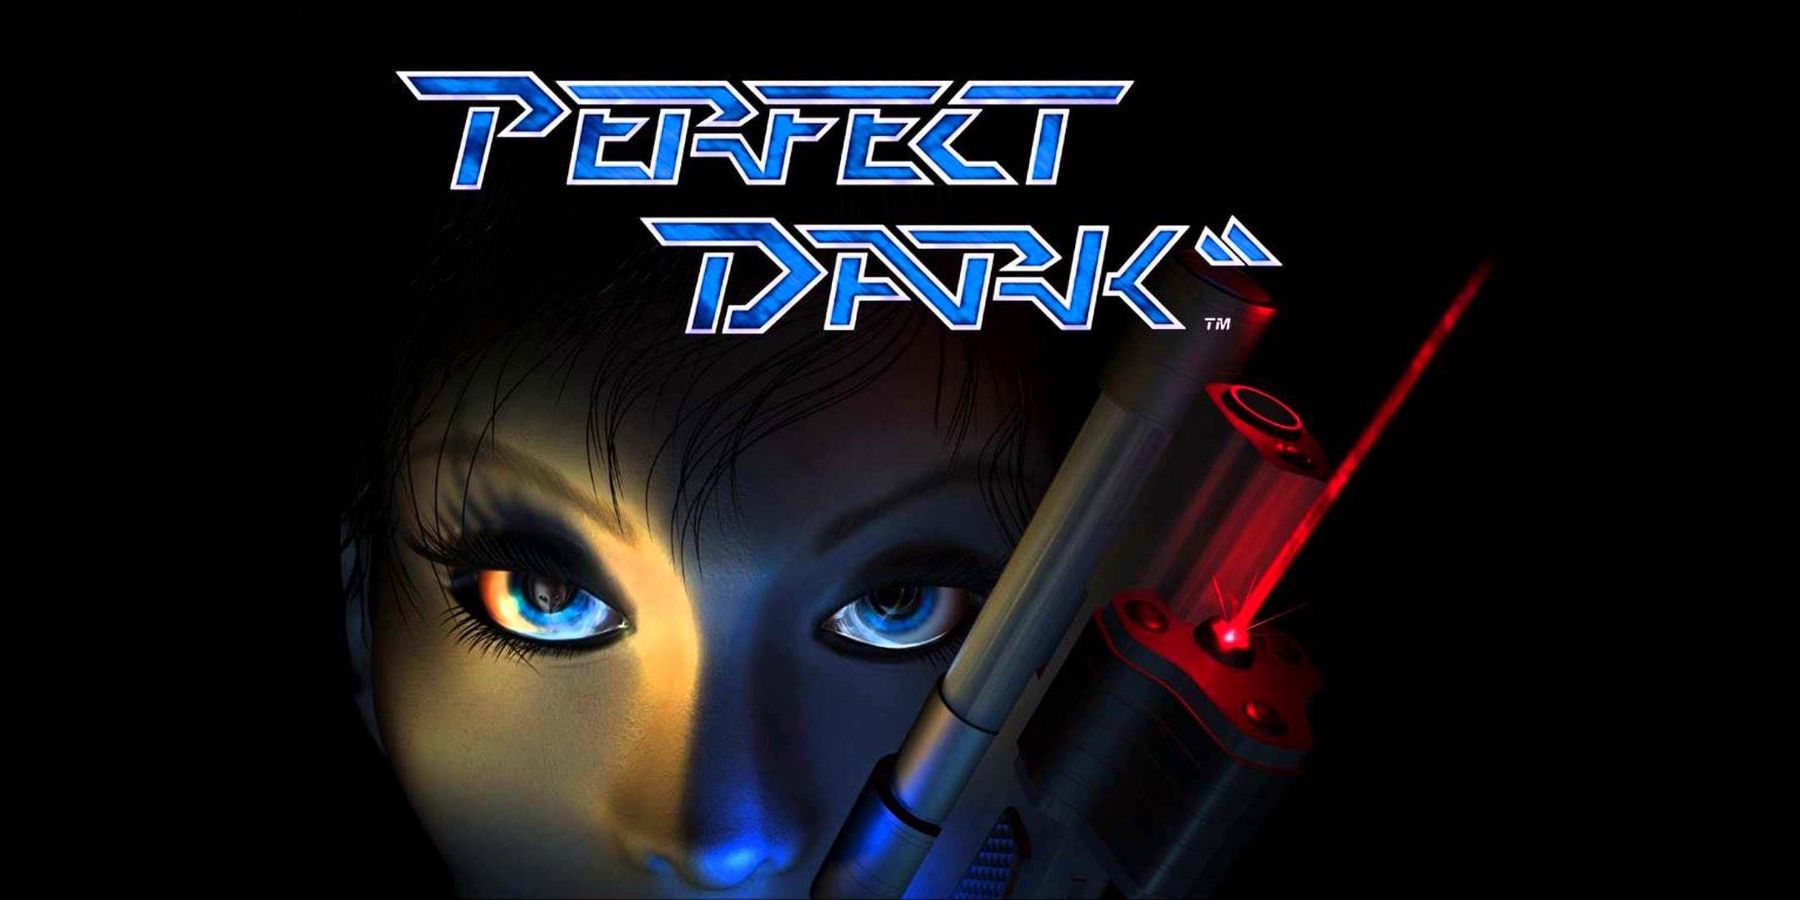 Cover art for Perfect Dark on the Nintendo 64